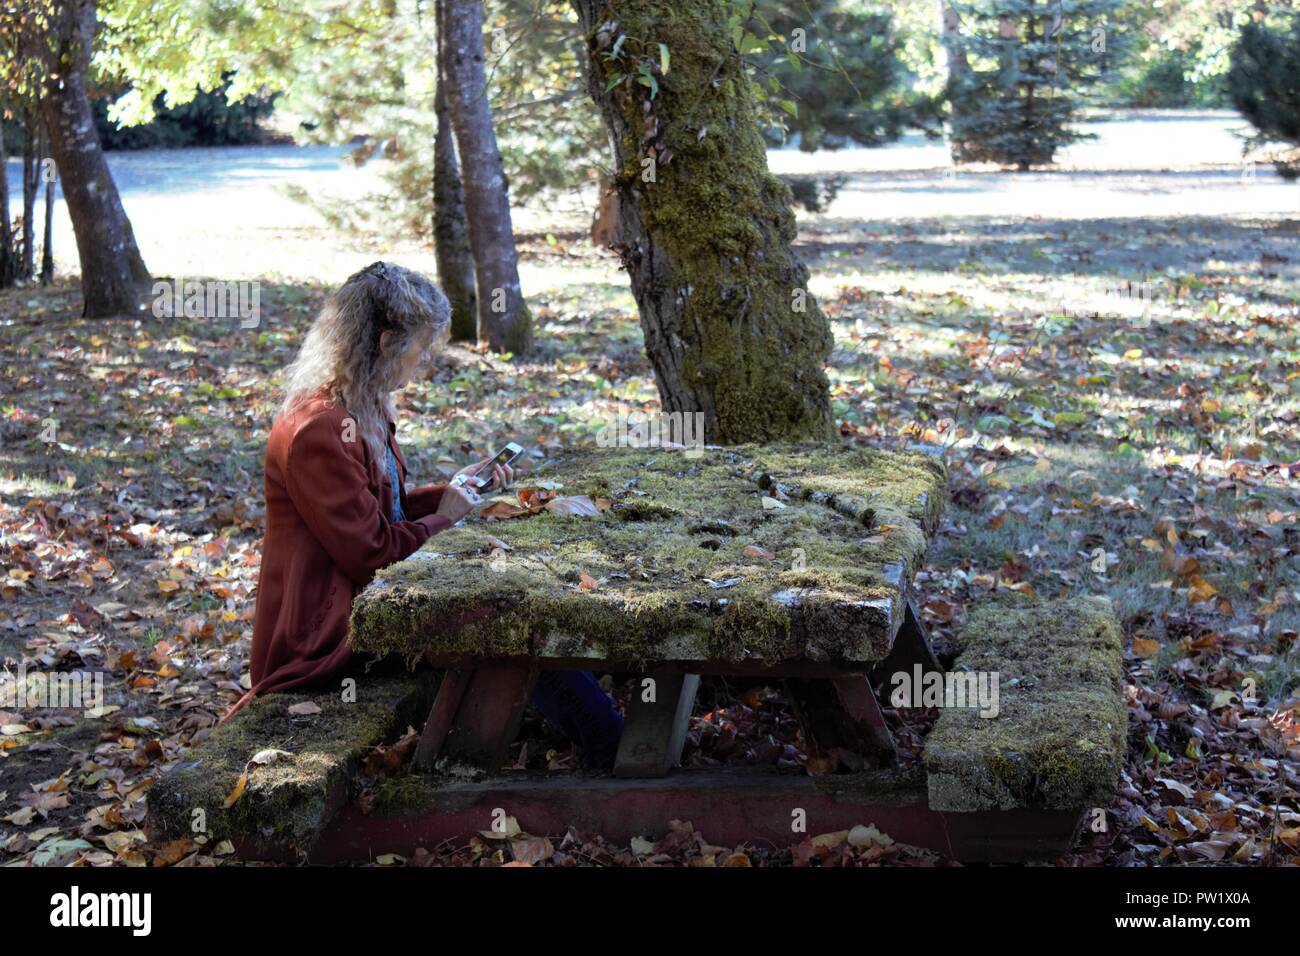 Texting on her iPhone, a woman sits at a moss covered picnic table. Stock Photo